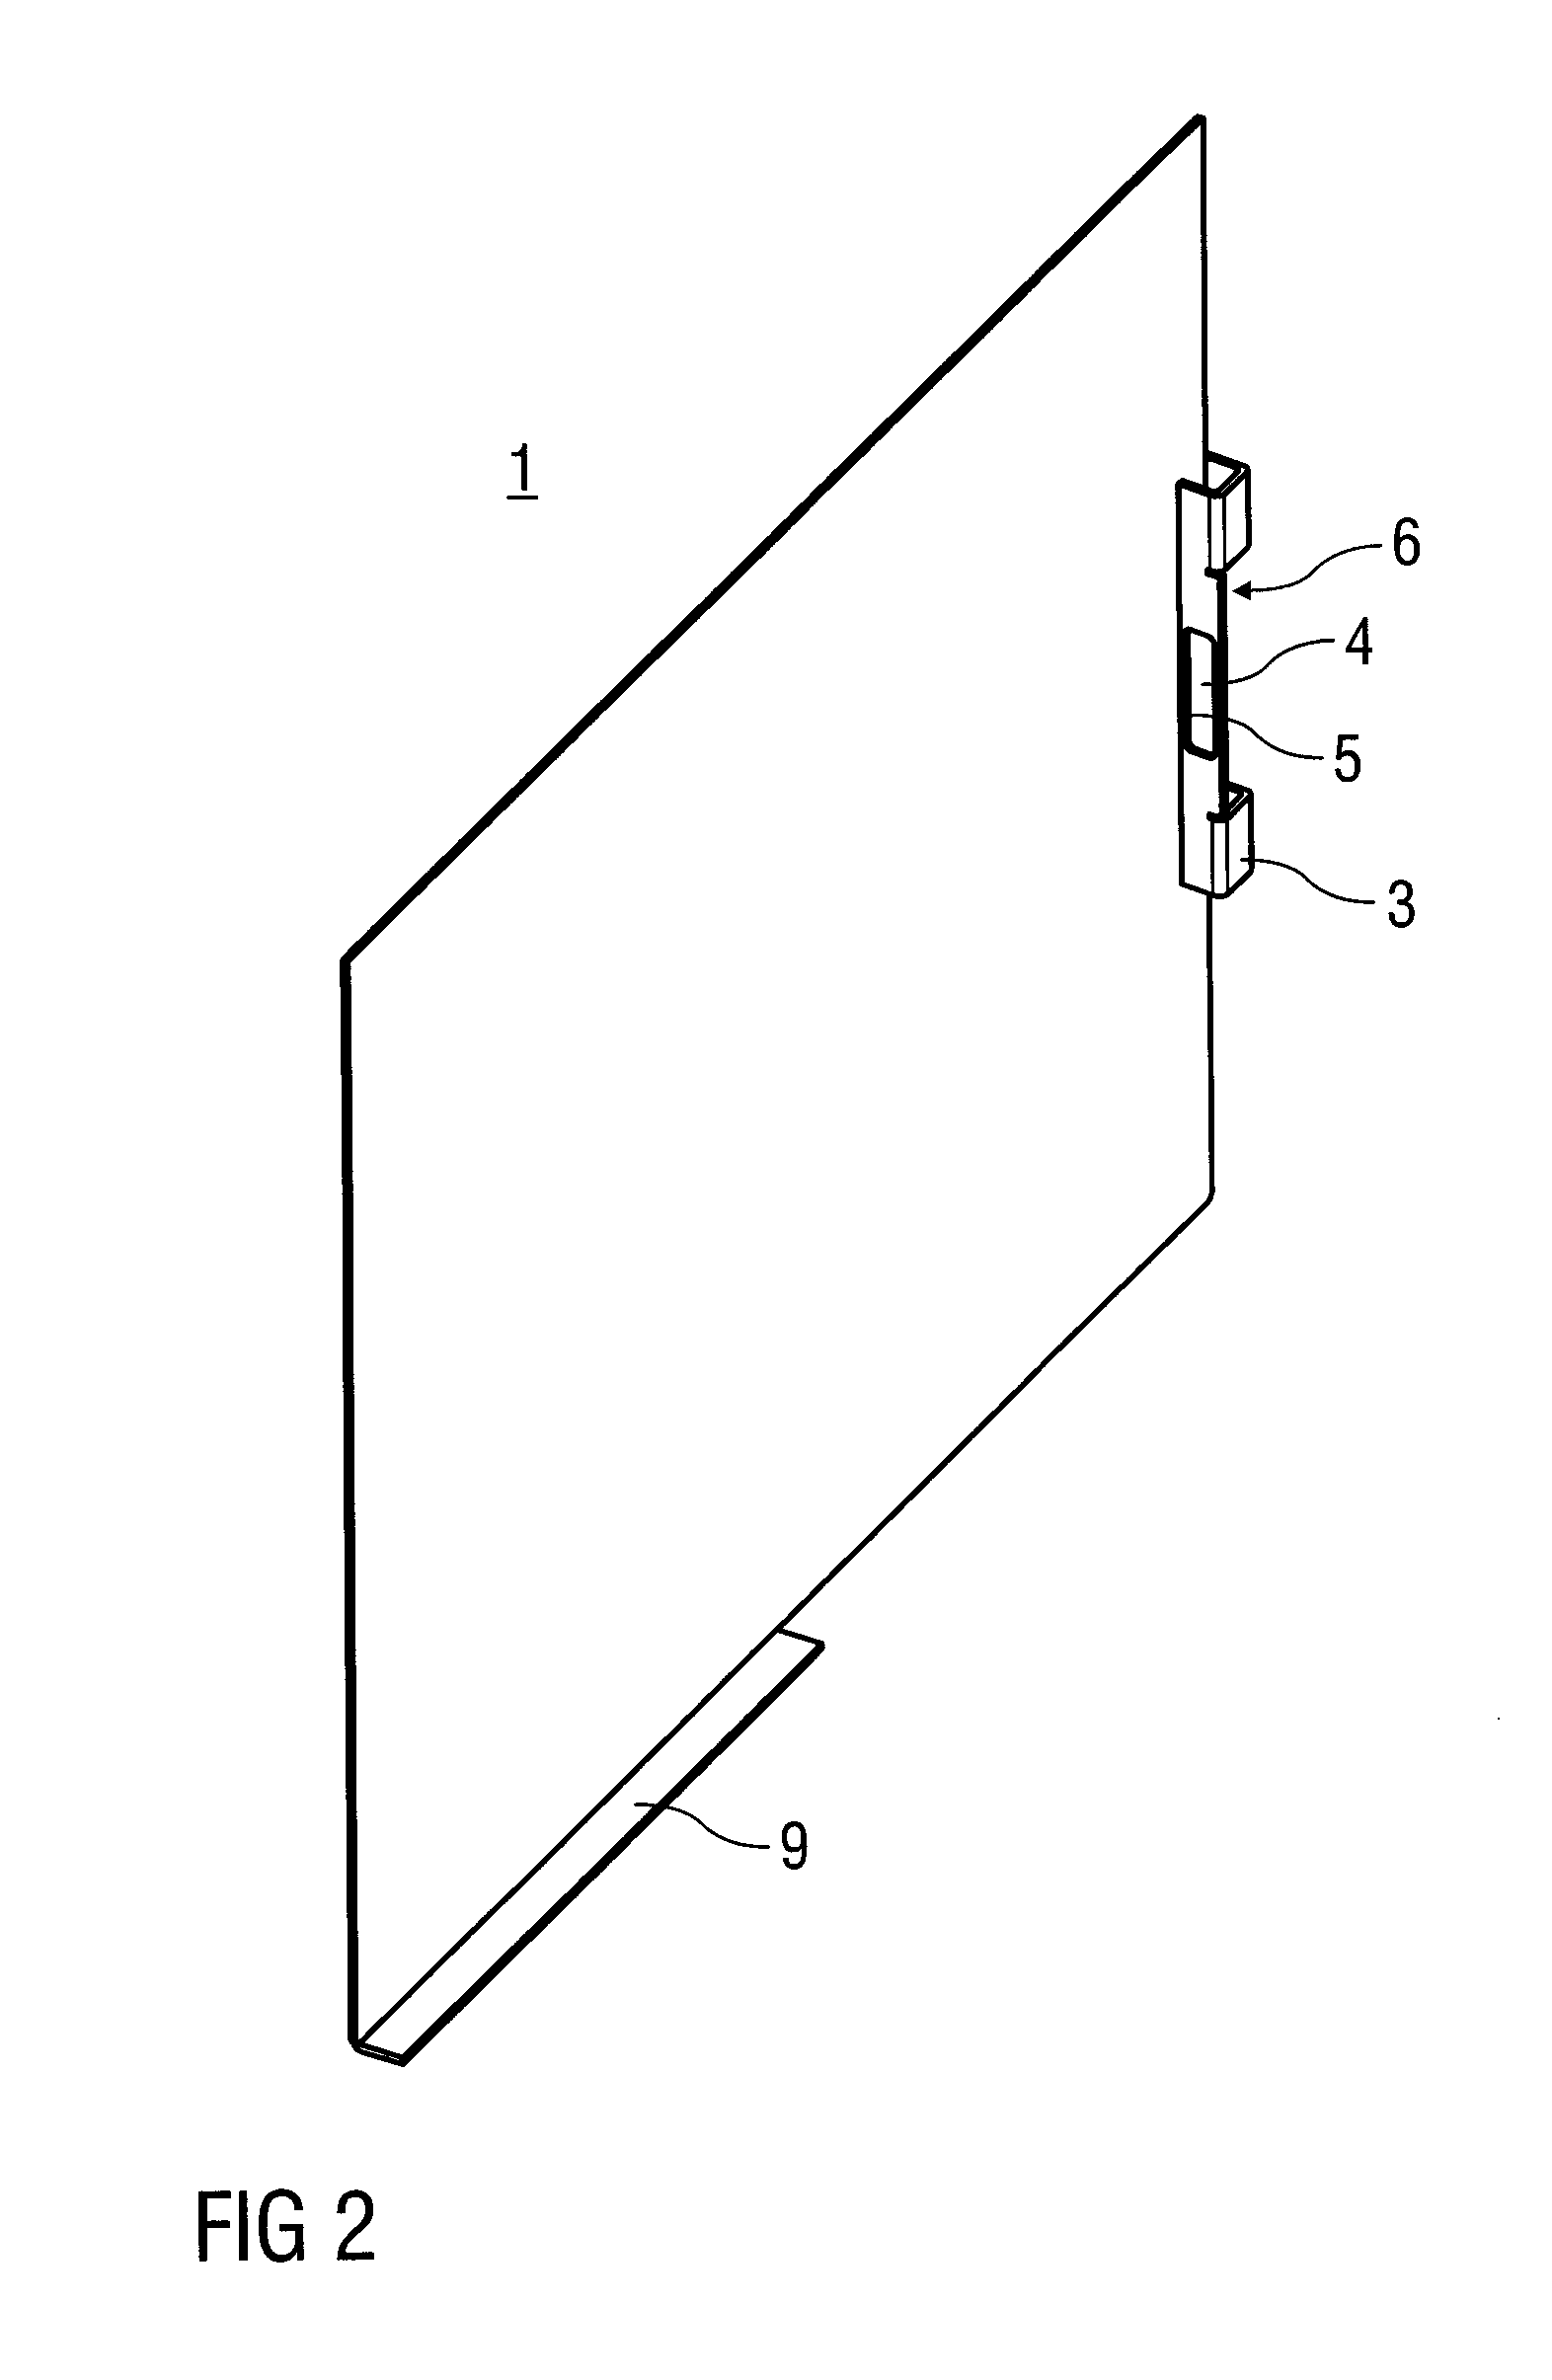 Galvanic Cell Having Overpressure Protection